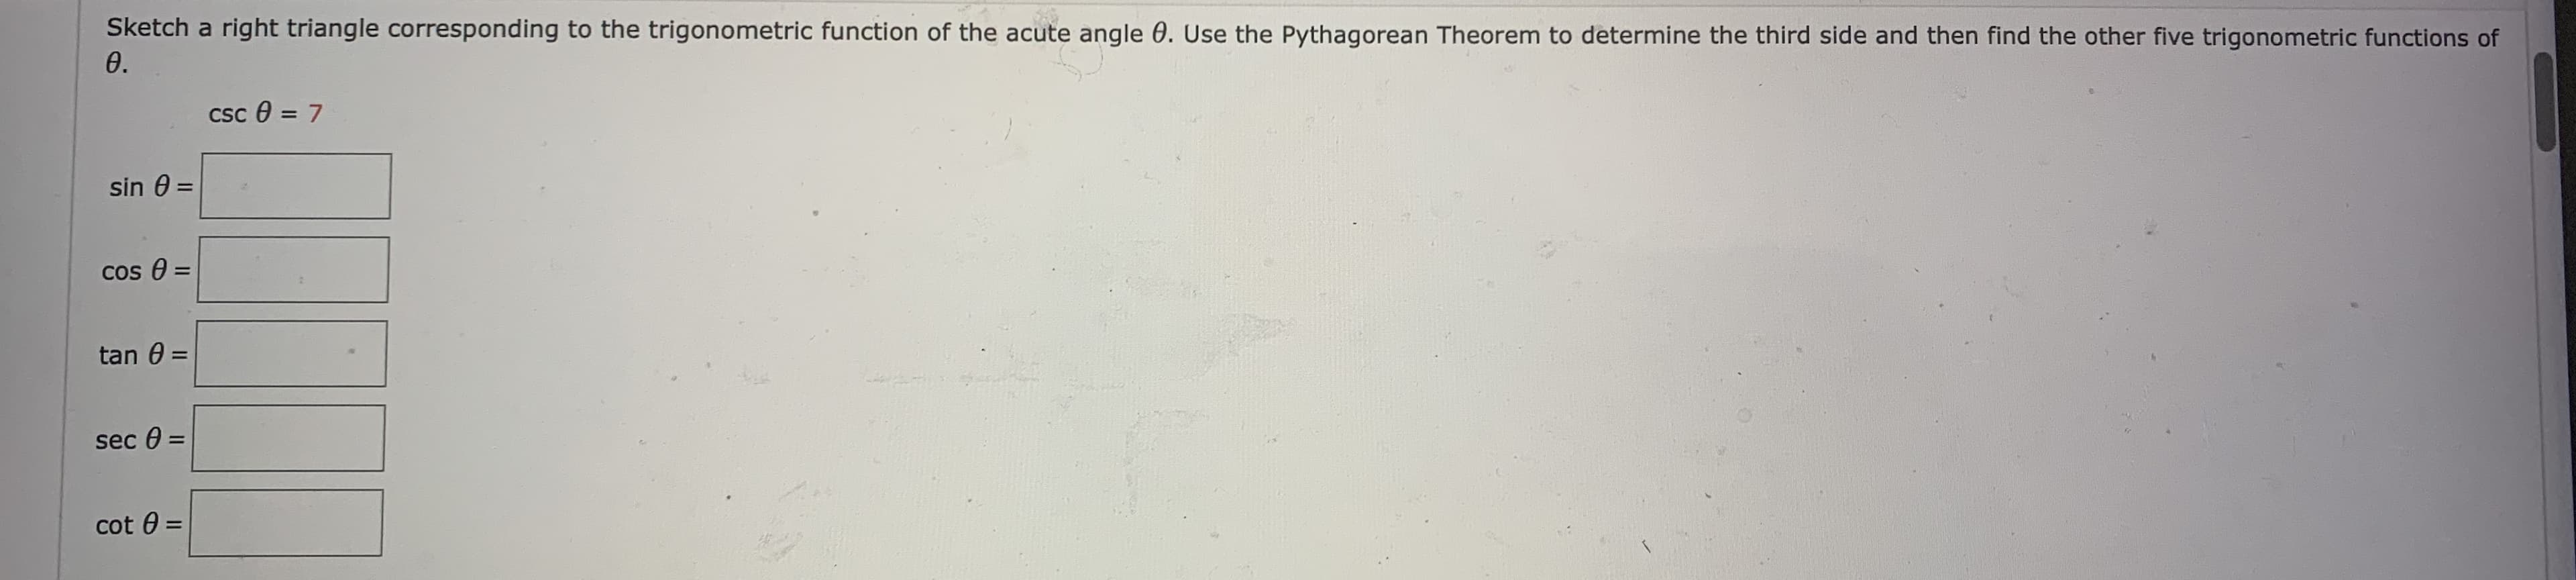 Sketch a right triangle corresponding to the trigonometric function of the acute angle 0. Use the Pythagorean Theorem to determine the third side and then find the other five trigonometric functions of
0.
csc e = 7
%3D
sin 0 =
cos 0 =
%3D
tan 0 =
sec 0 =
cot 0
%3D
